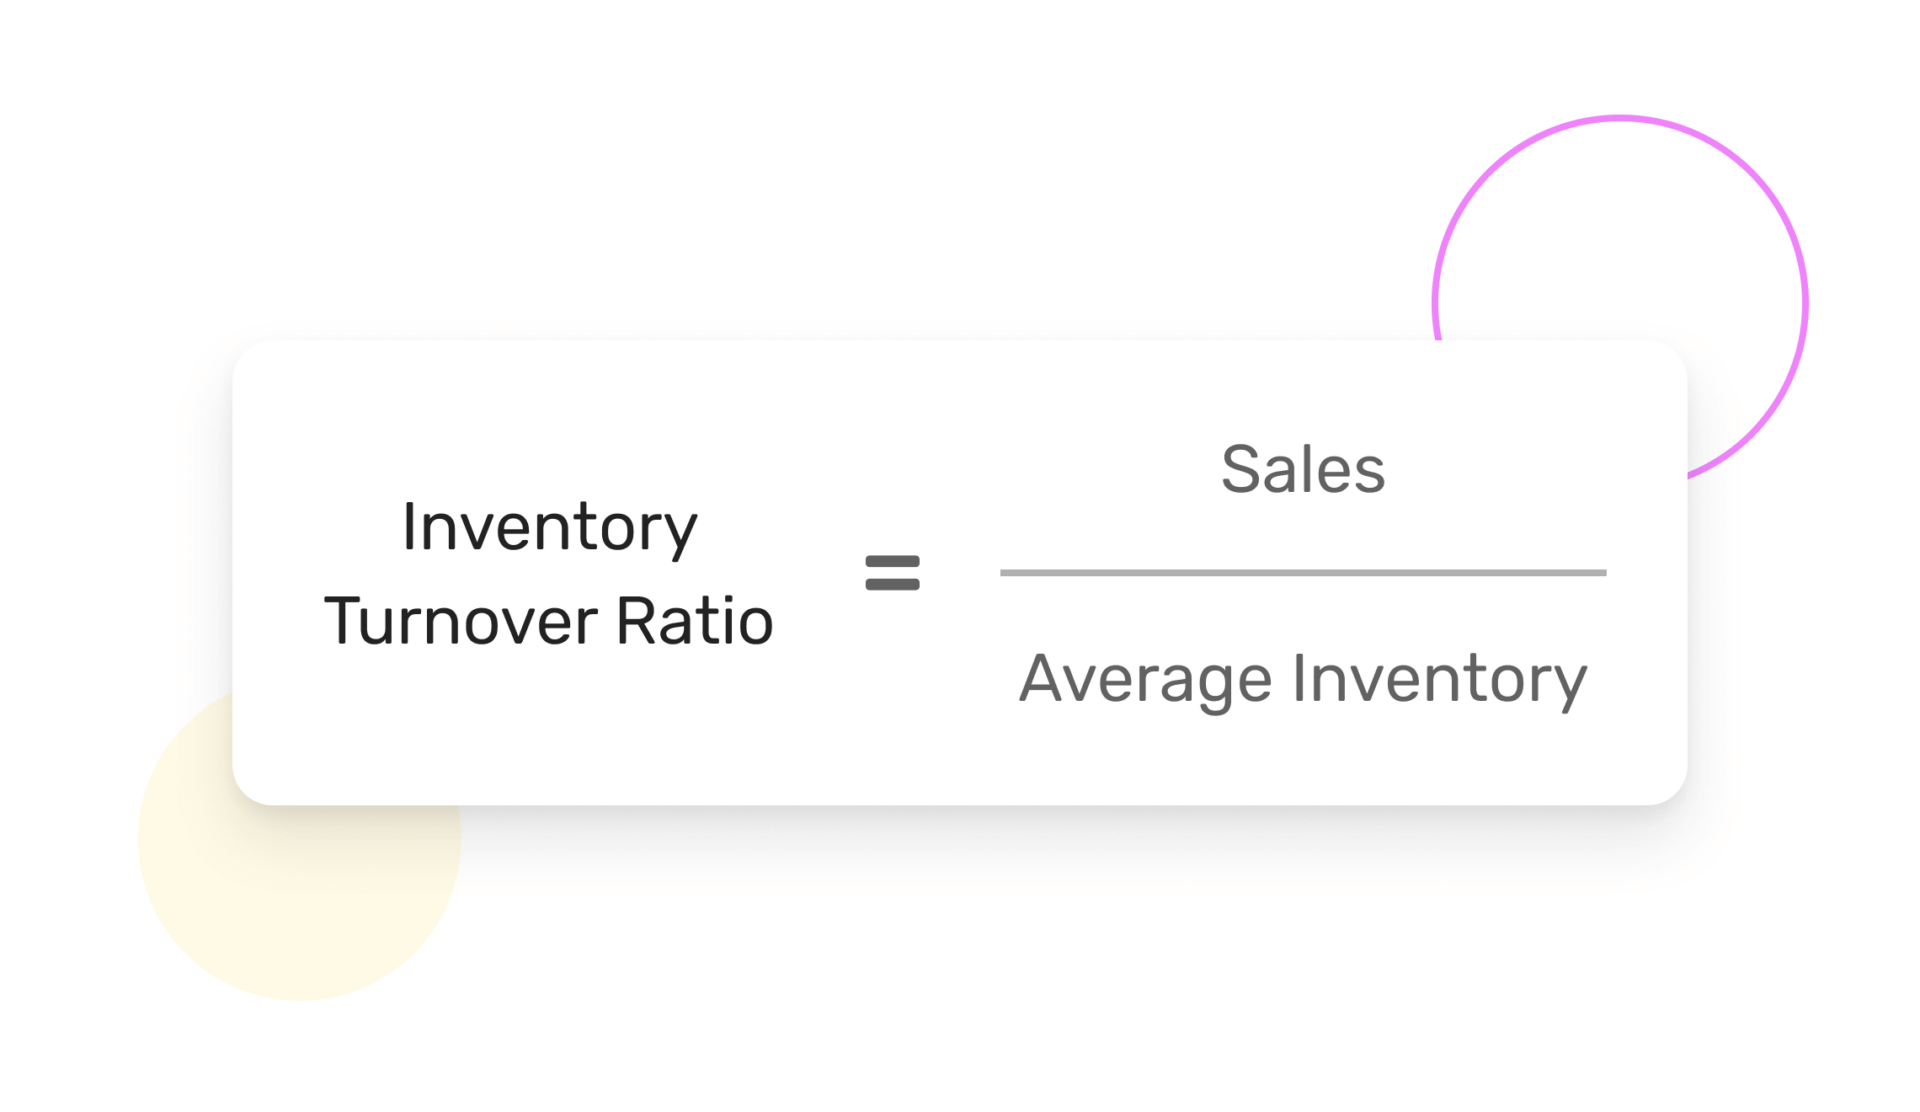 inventory turnover ratio